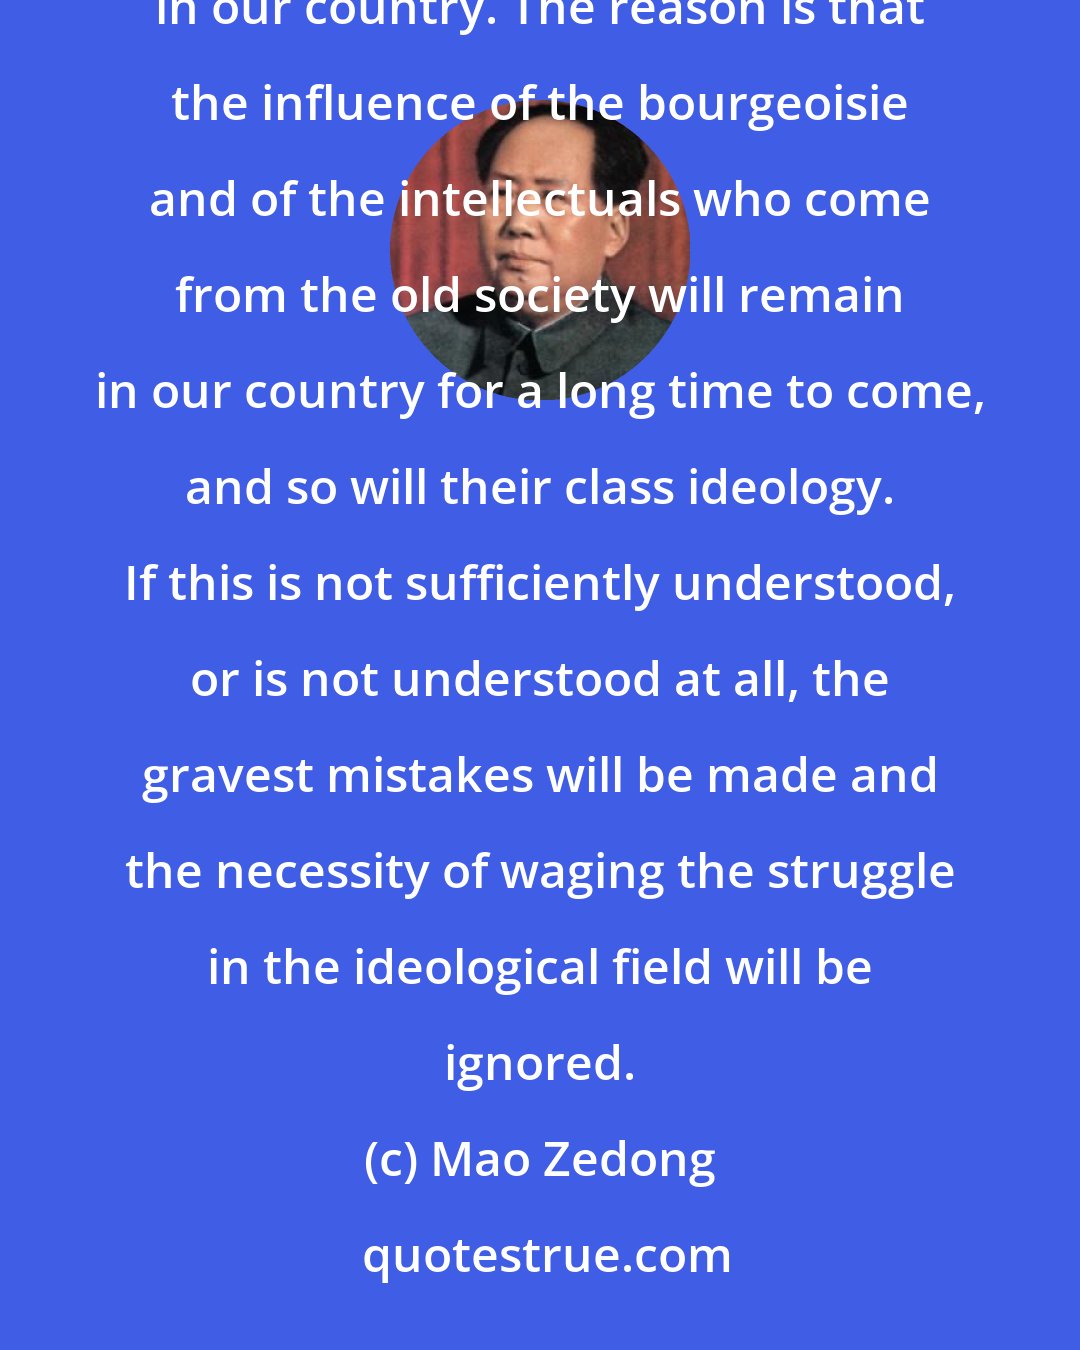 Mao Zedong: It will take a long period to decide the issue in the ideological struggle between socialism and capitalism in our country. The reason is that the influence of the bourgeoisie and of the intellectuals who come from the old society will remain in our country for a long time to come, and so will their class ideology. If this is not sufficiently understood, or is not understood at all, the gravest mistakes will be made and the necessity of waging the struggle in the ideological field will be ignored.